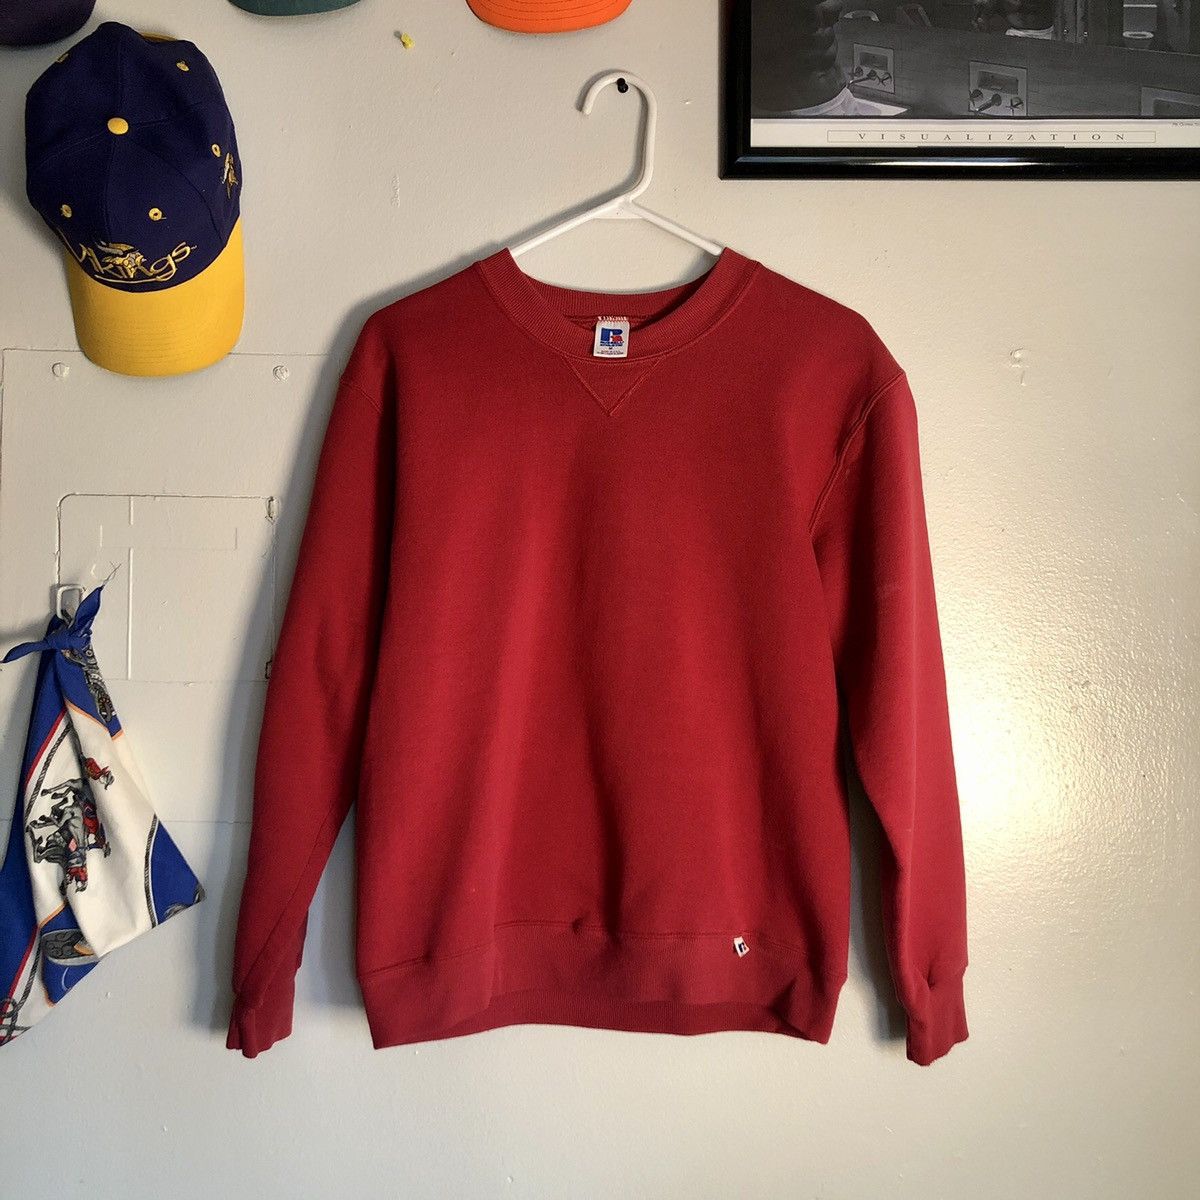 Russell Athletic Vintage Russell Crewneck | Grailed